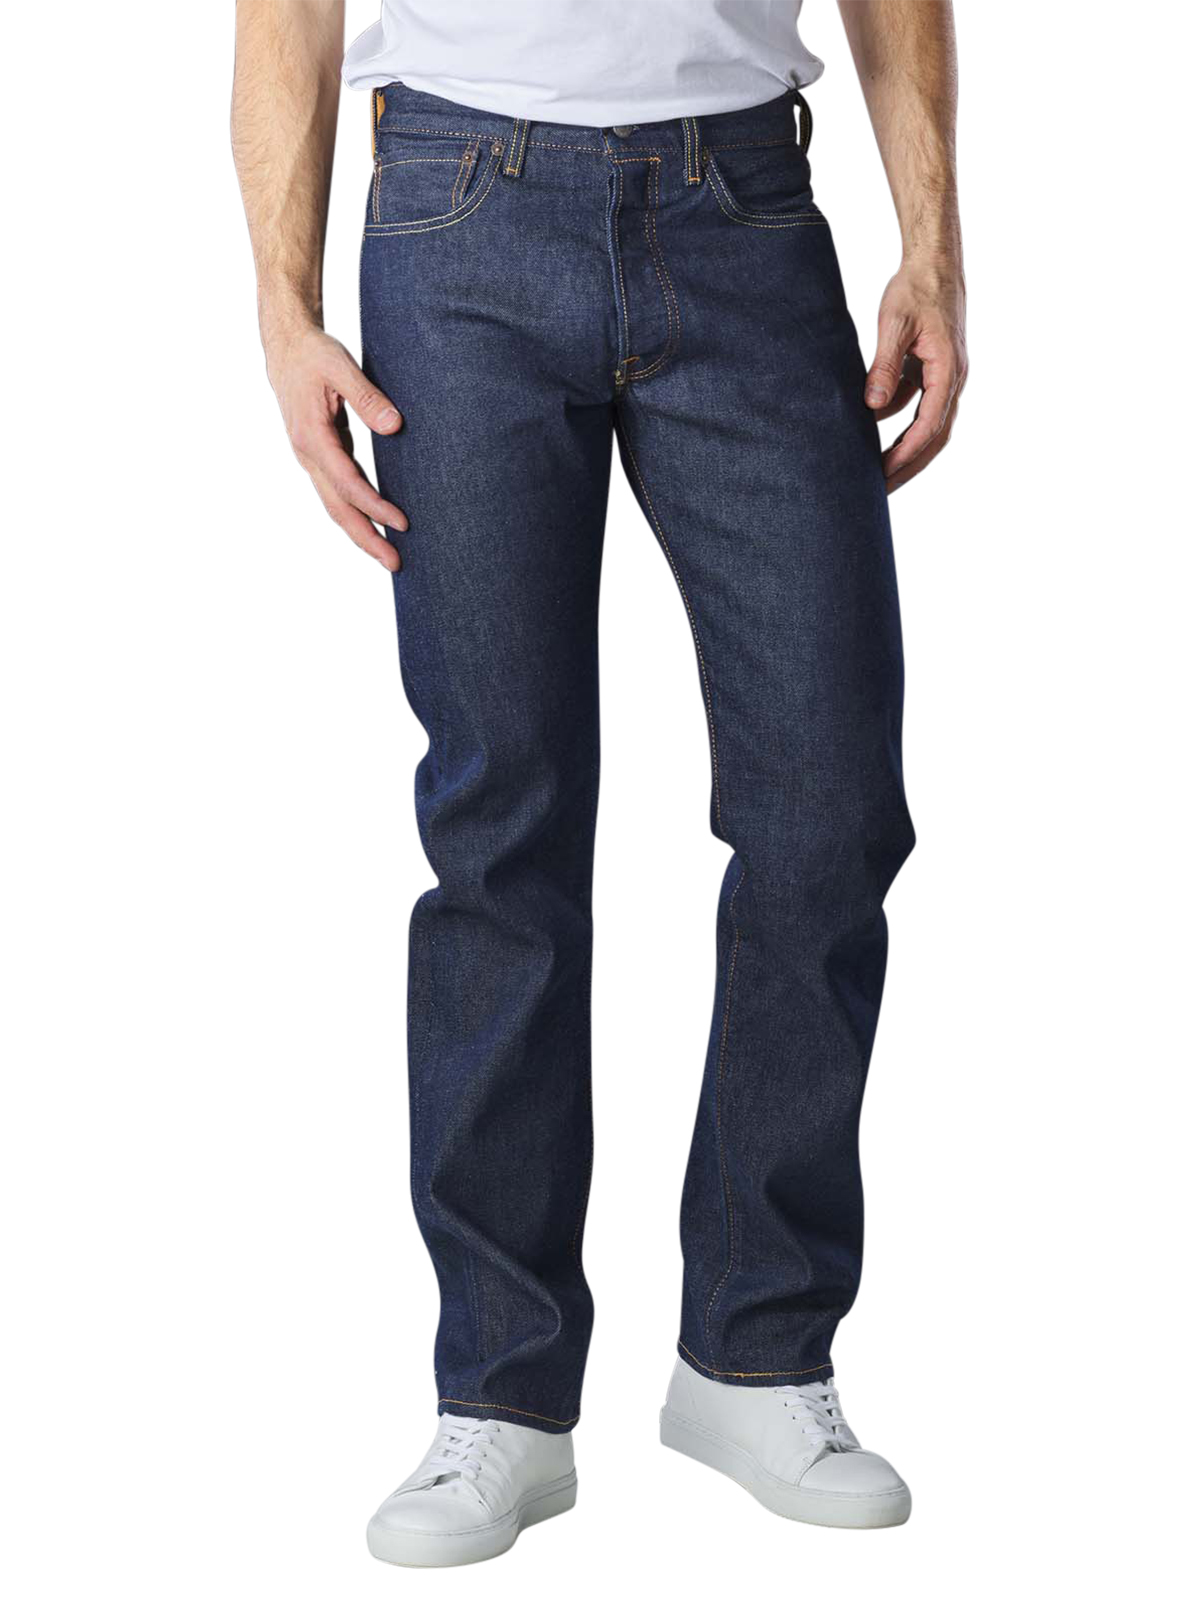 Levi's 501 Jeans Straight Fit the rose stretch Levi's Men's Jeans | Free  Shipping on  - SIMPLY LOOK GOOD